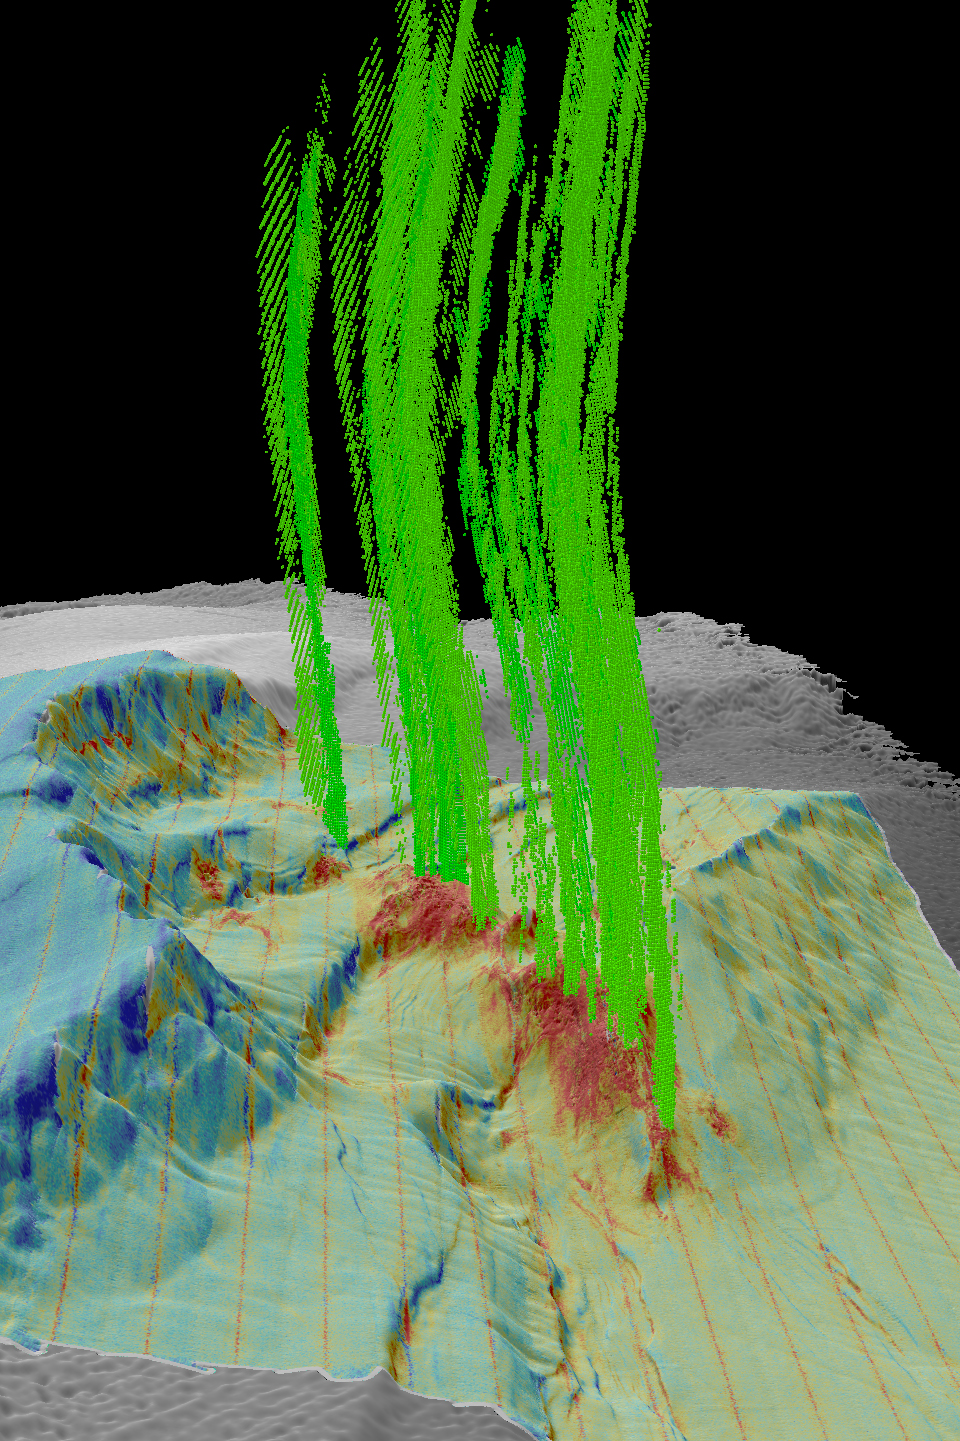 Map of the seafloor and bubble streams rising from seeps. Multibeam echo sounder data collected from a survey ship show the seafloor topography (gray). Seafloor colors are based on the intensity of the echo return, or backscatter, and show where the seafloor is hard/rough (warm colors) or soft/smooth (cool colors). Most of the seafloor is covered by soft sediment, but around seeps the seafloor is often hard due to chemosynthetic mussel beds and from carbonate rock that precipitates from methane reacting with seawater (bright red areas). Multibeam echo sounders can also see anomalies in the water above the seafloor, such as these gas bubble plumes (green) issuing from seafloor seeps. The red lines are artifacts in the backscatter data that follow the ship’s track.